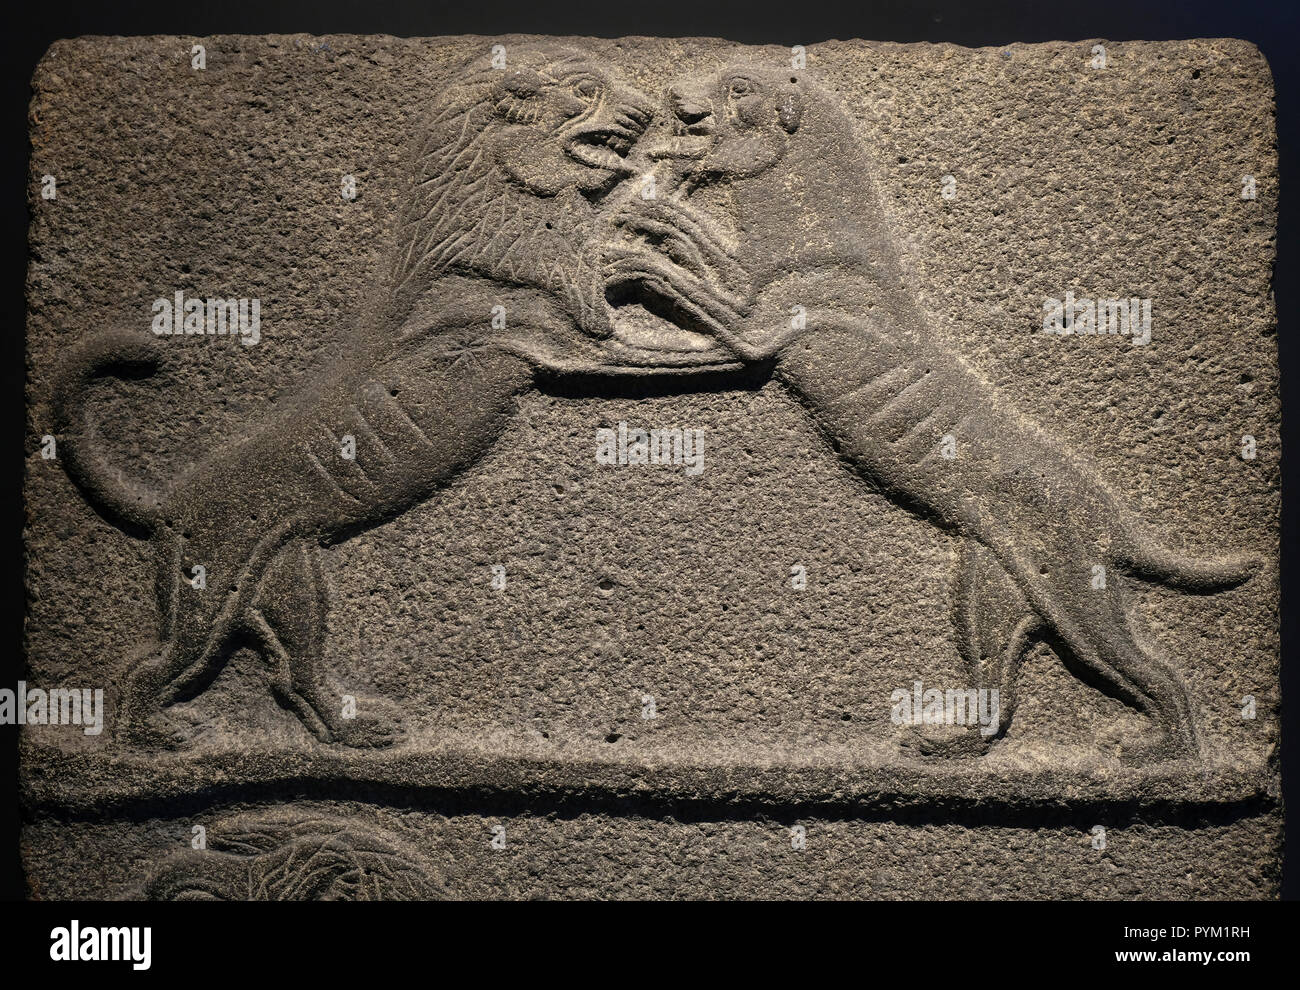 Basalt relief from the Canaanite period depicting a Lion and lioness at play14th century BCE found in Beth Shean displayed at the Archeology Wing in the Israel Museum in West Jerusalem Israel Stock Photo